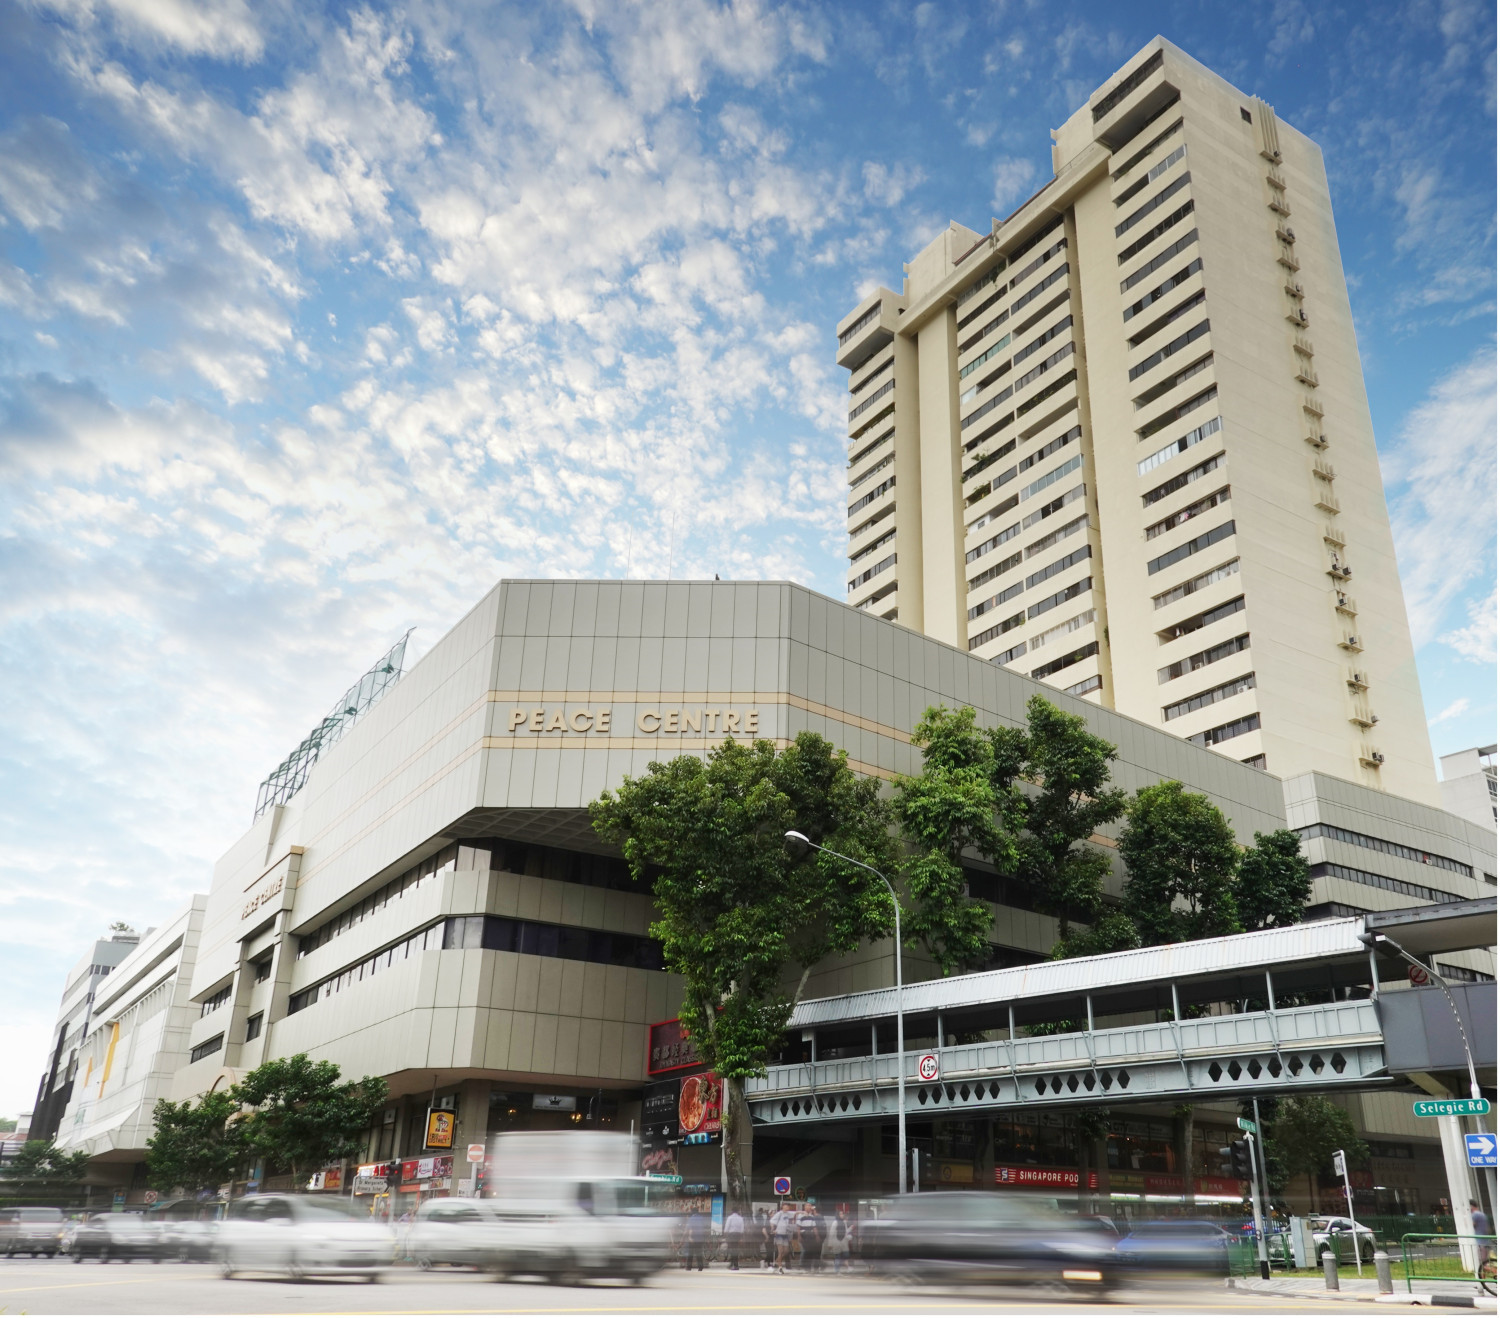 Peace Centre and Peace Mansion launch collective sale tender, owners expect offers of more than $650 mil - Property News